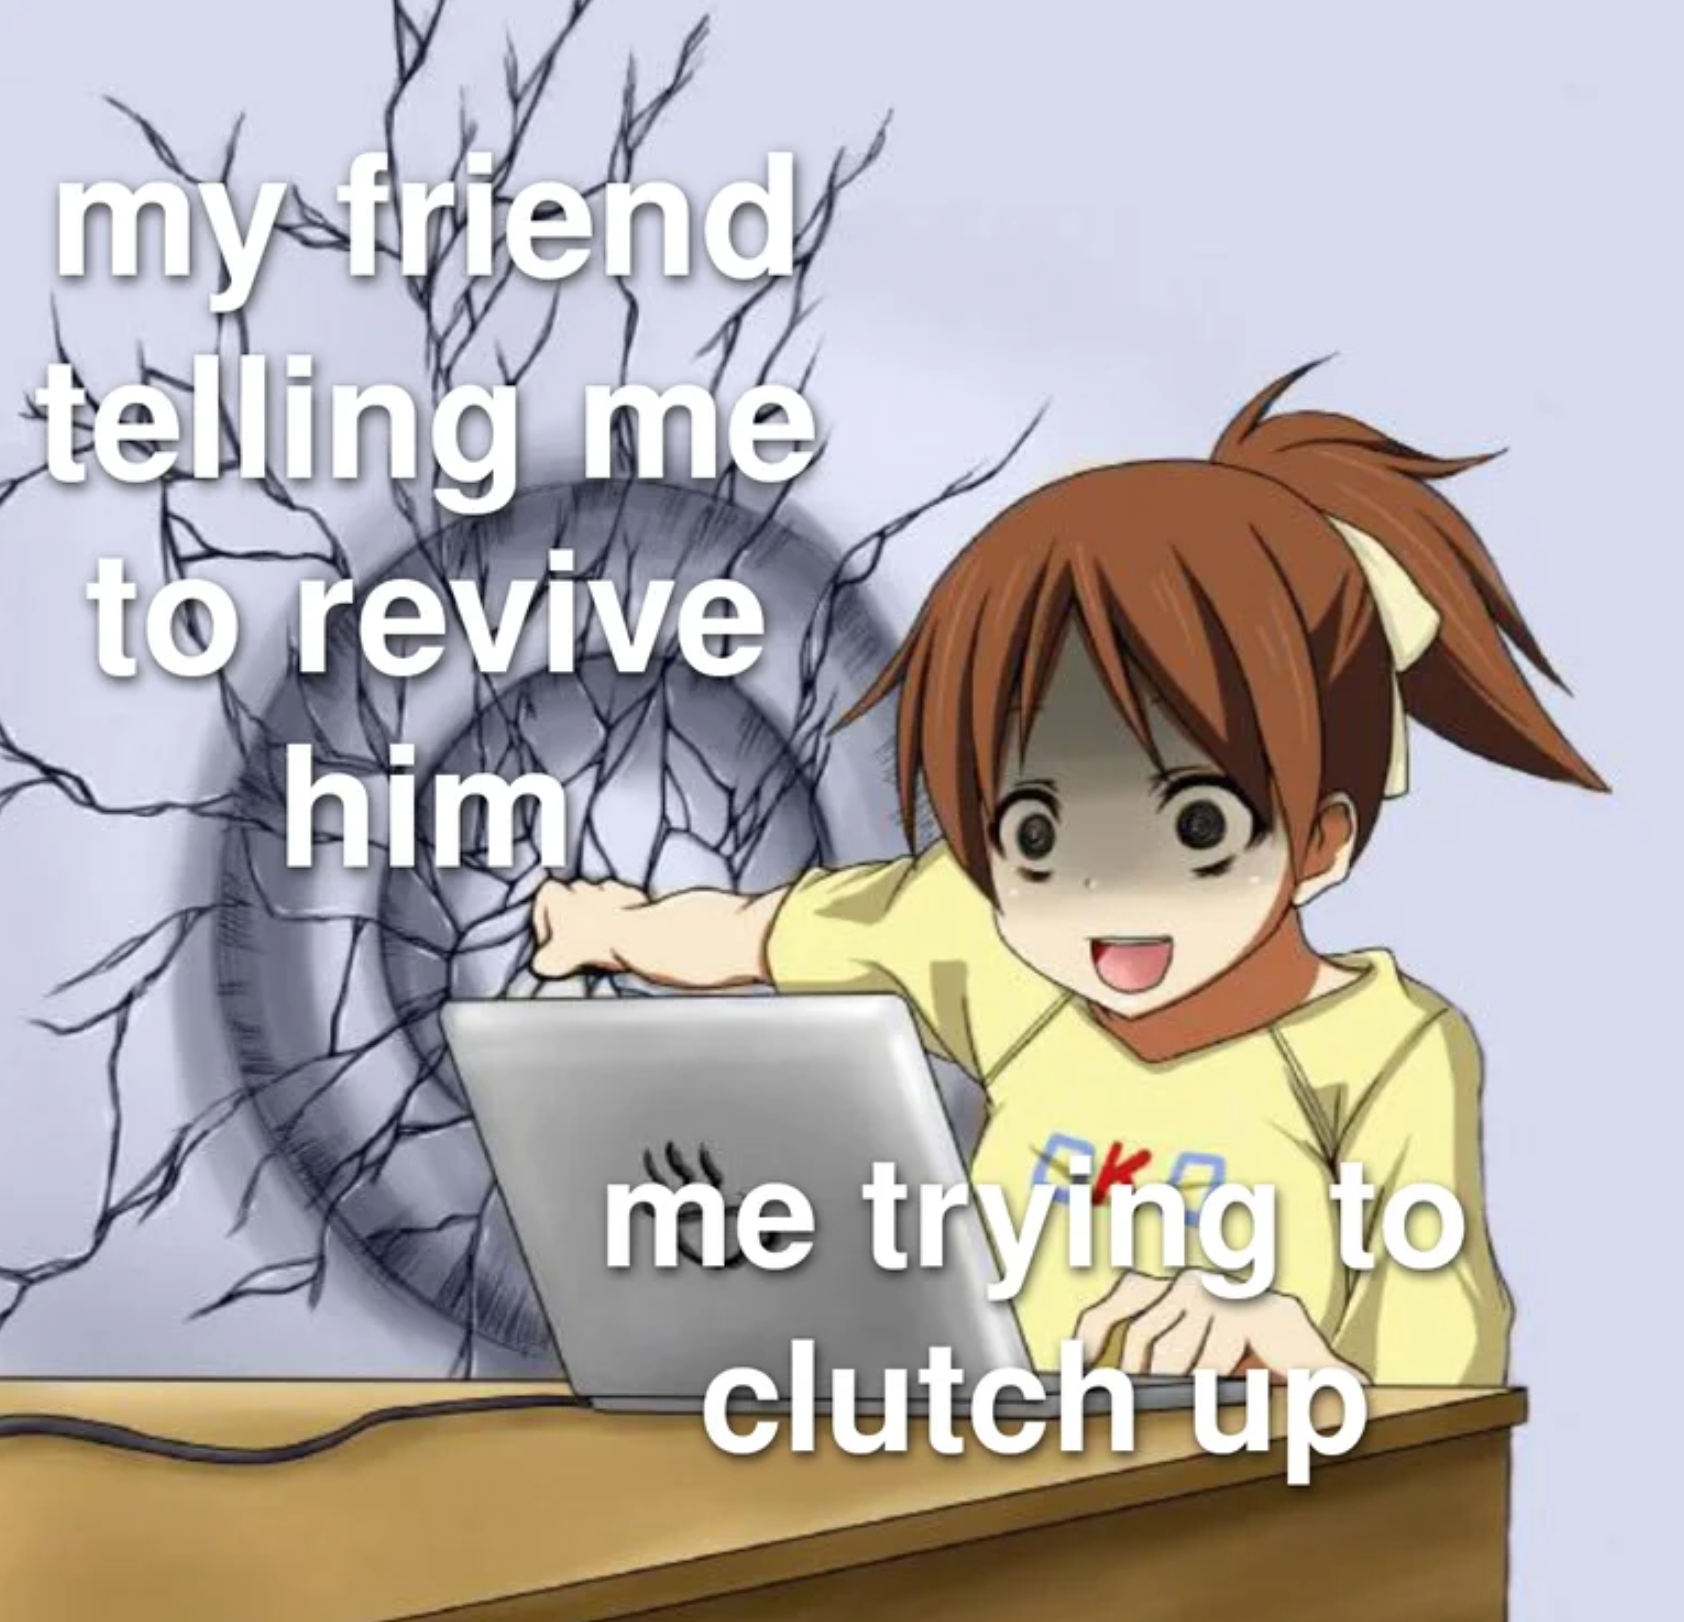 funny gaming memes  - anime wall punch meme - myfriend telling me to revive him me trying to clutch up